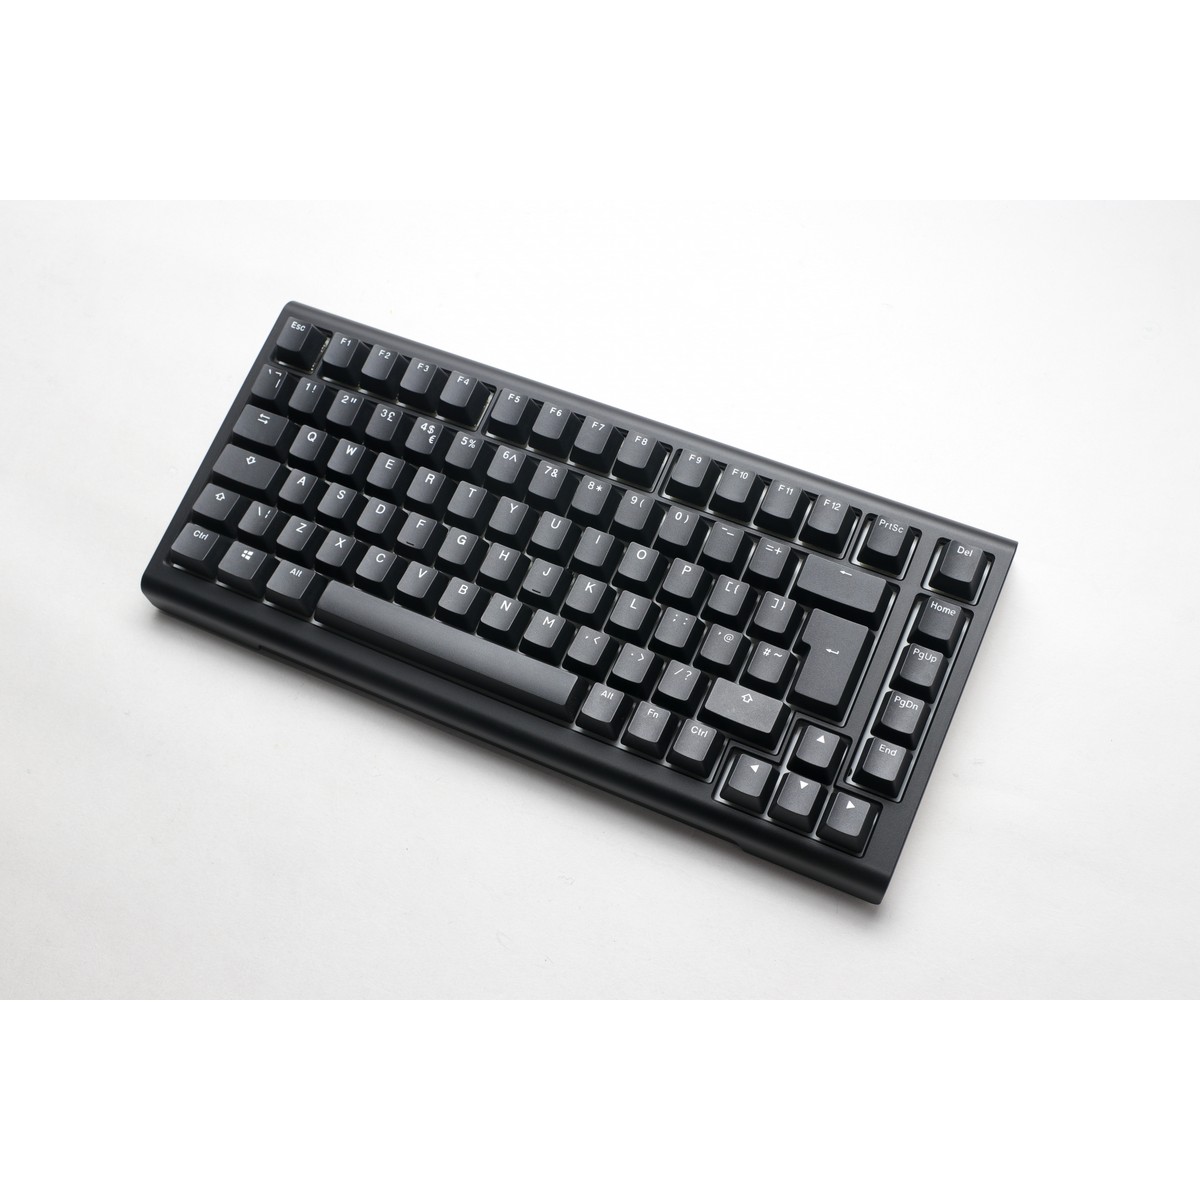 Ducky - Ducky Project D Tinker 75% RGB USB Mechanical Gaming Keyboard Cherry MX Speed Si